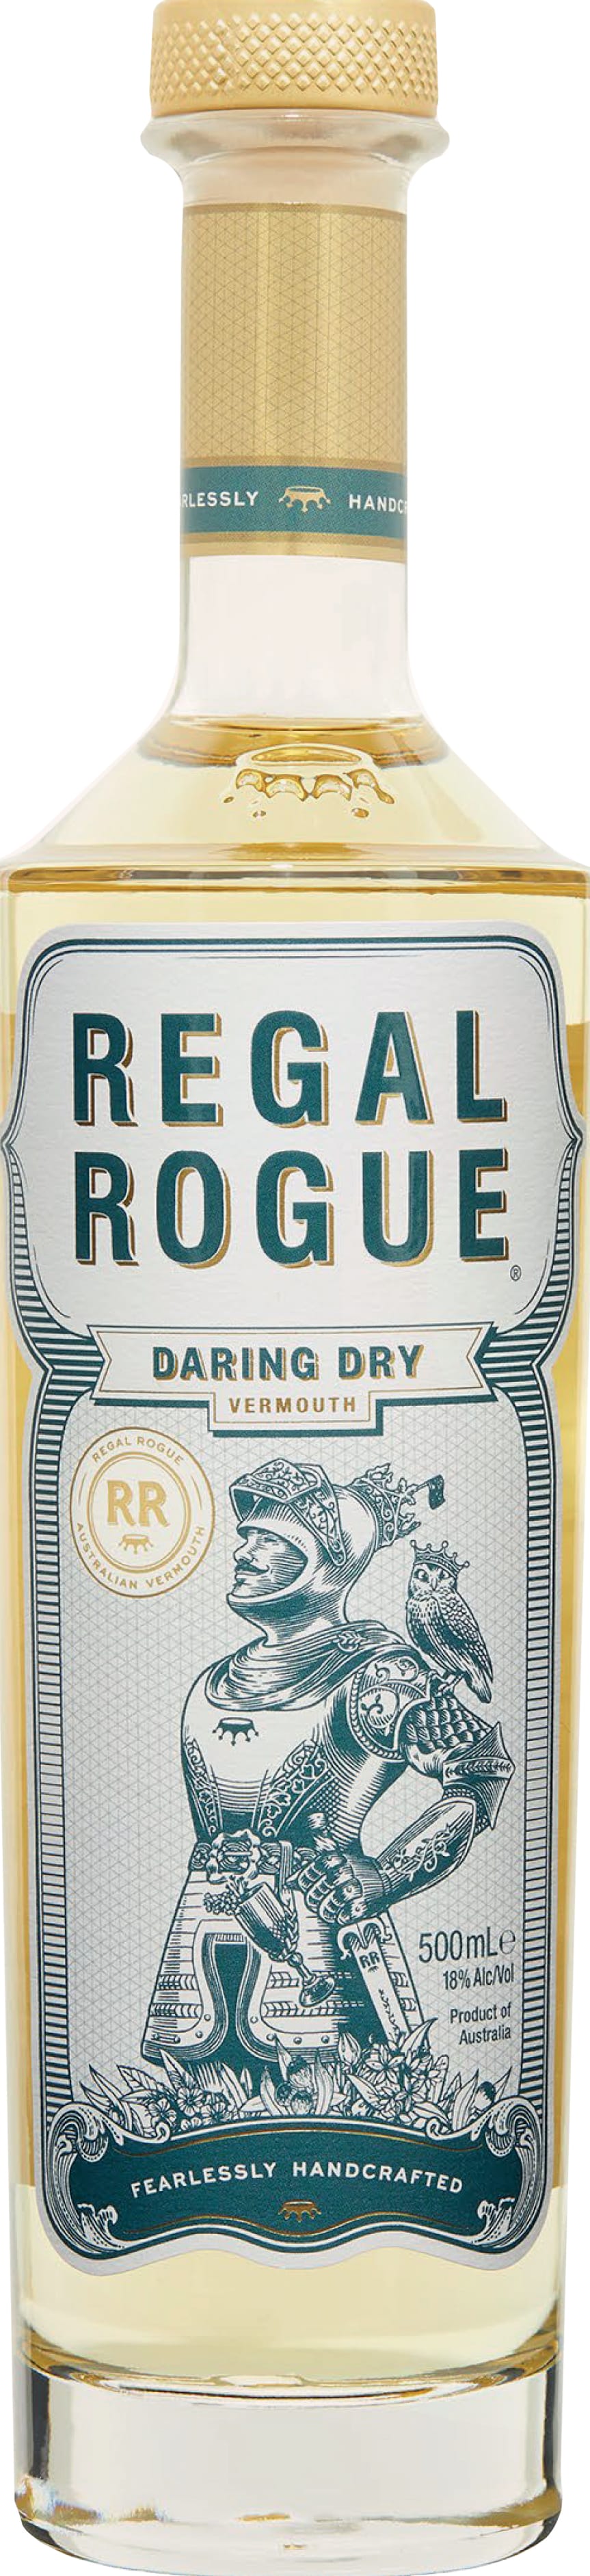 Regal Rogue Daring Dry Vermouth 50cl NV - Buy Regal Rogue Wines from GREAT WINES DIRECT wine shop